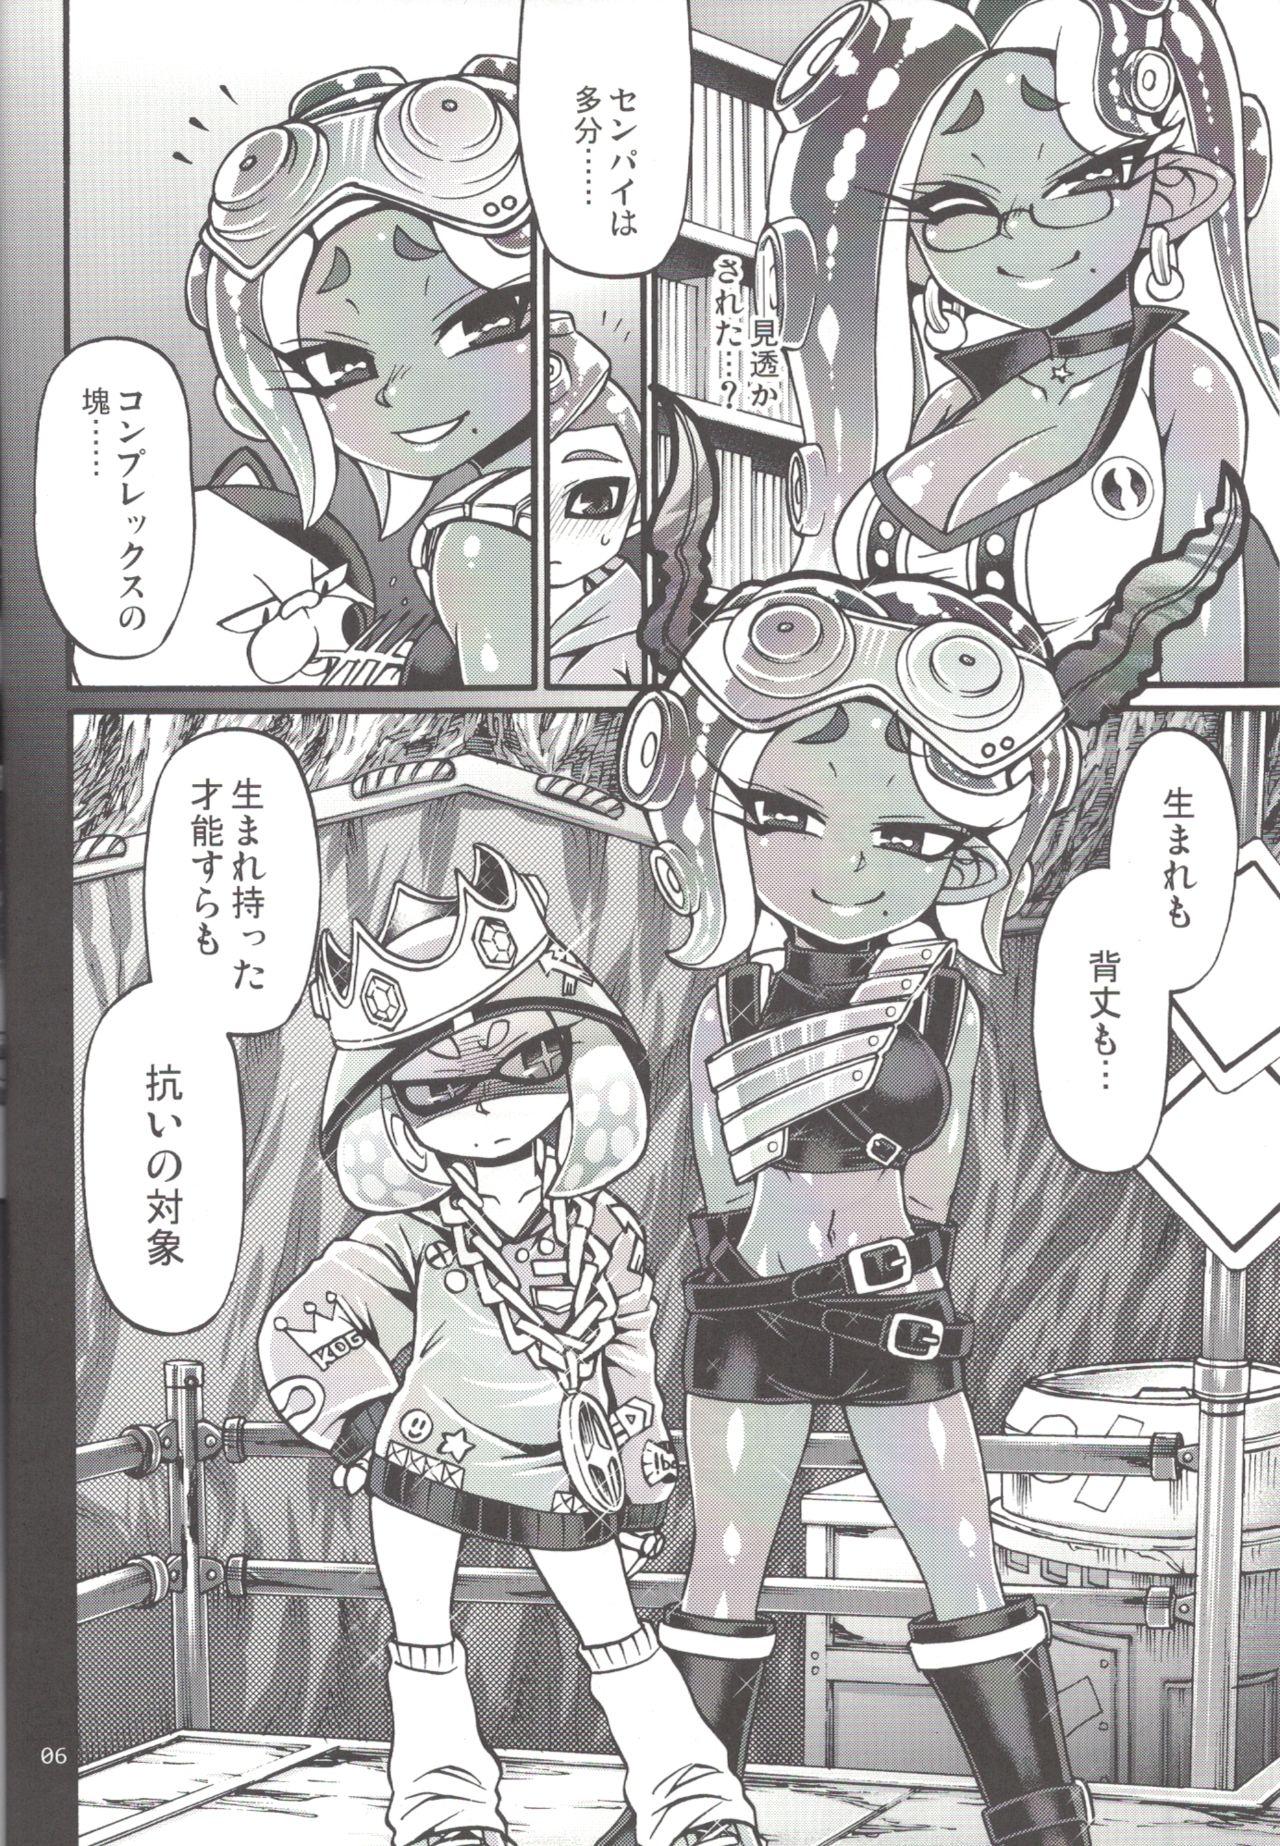 Free Amature Porn Slowly you will be loved - Splatoon Oral - Page 5